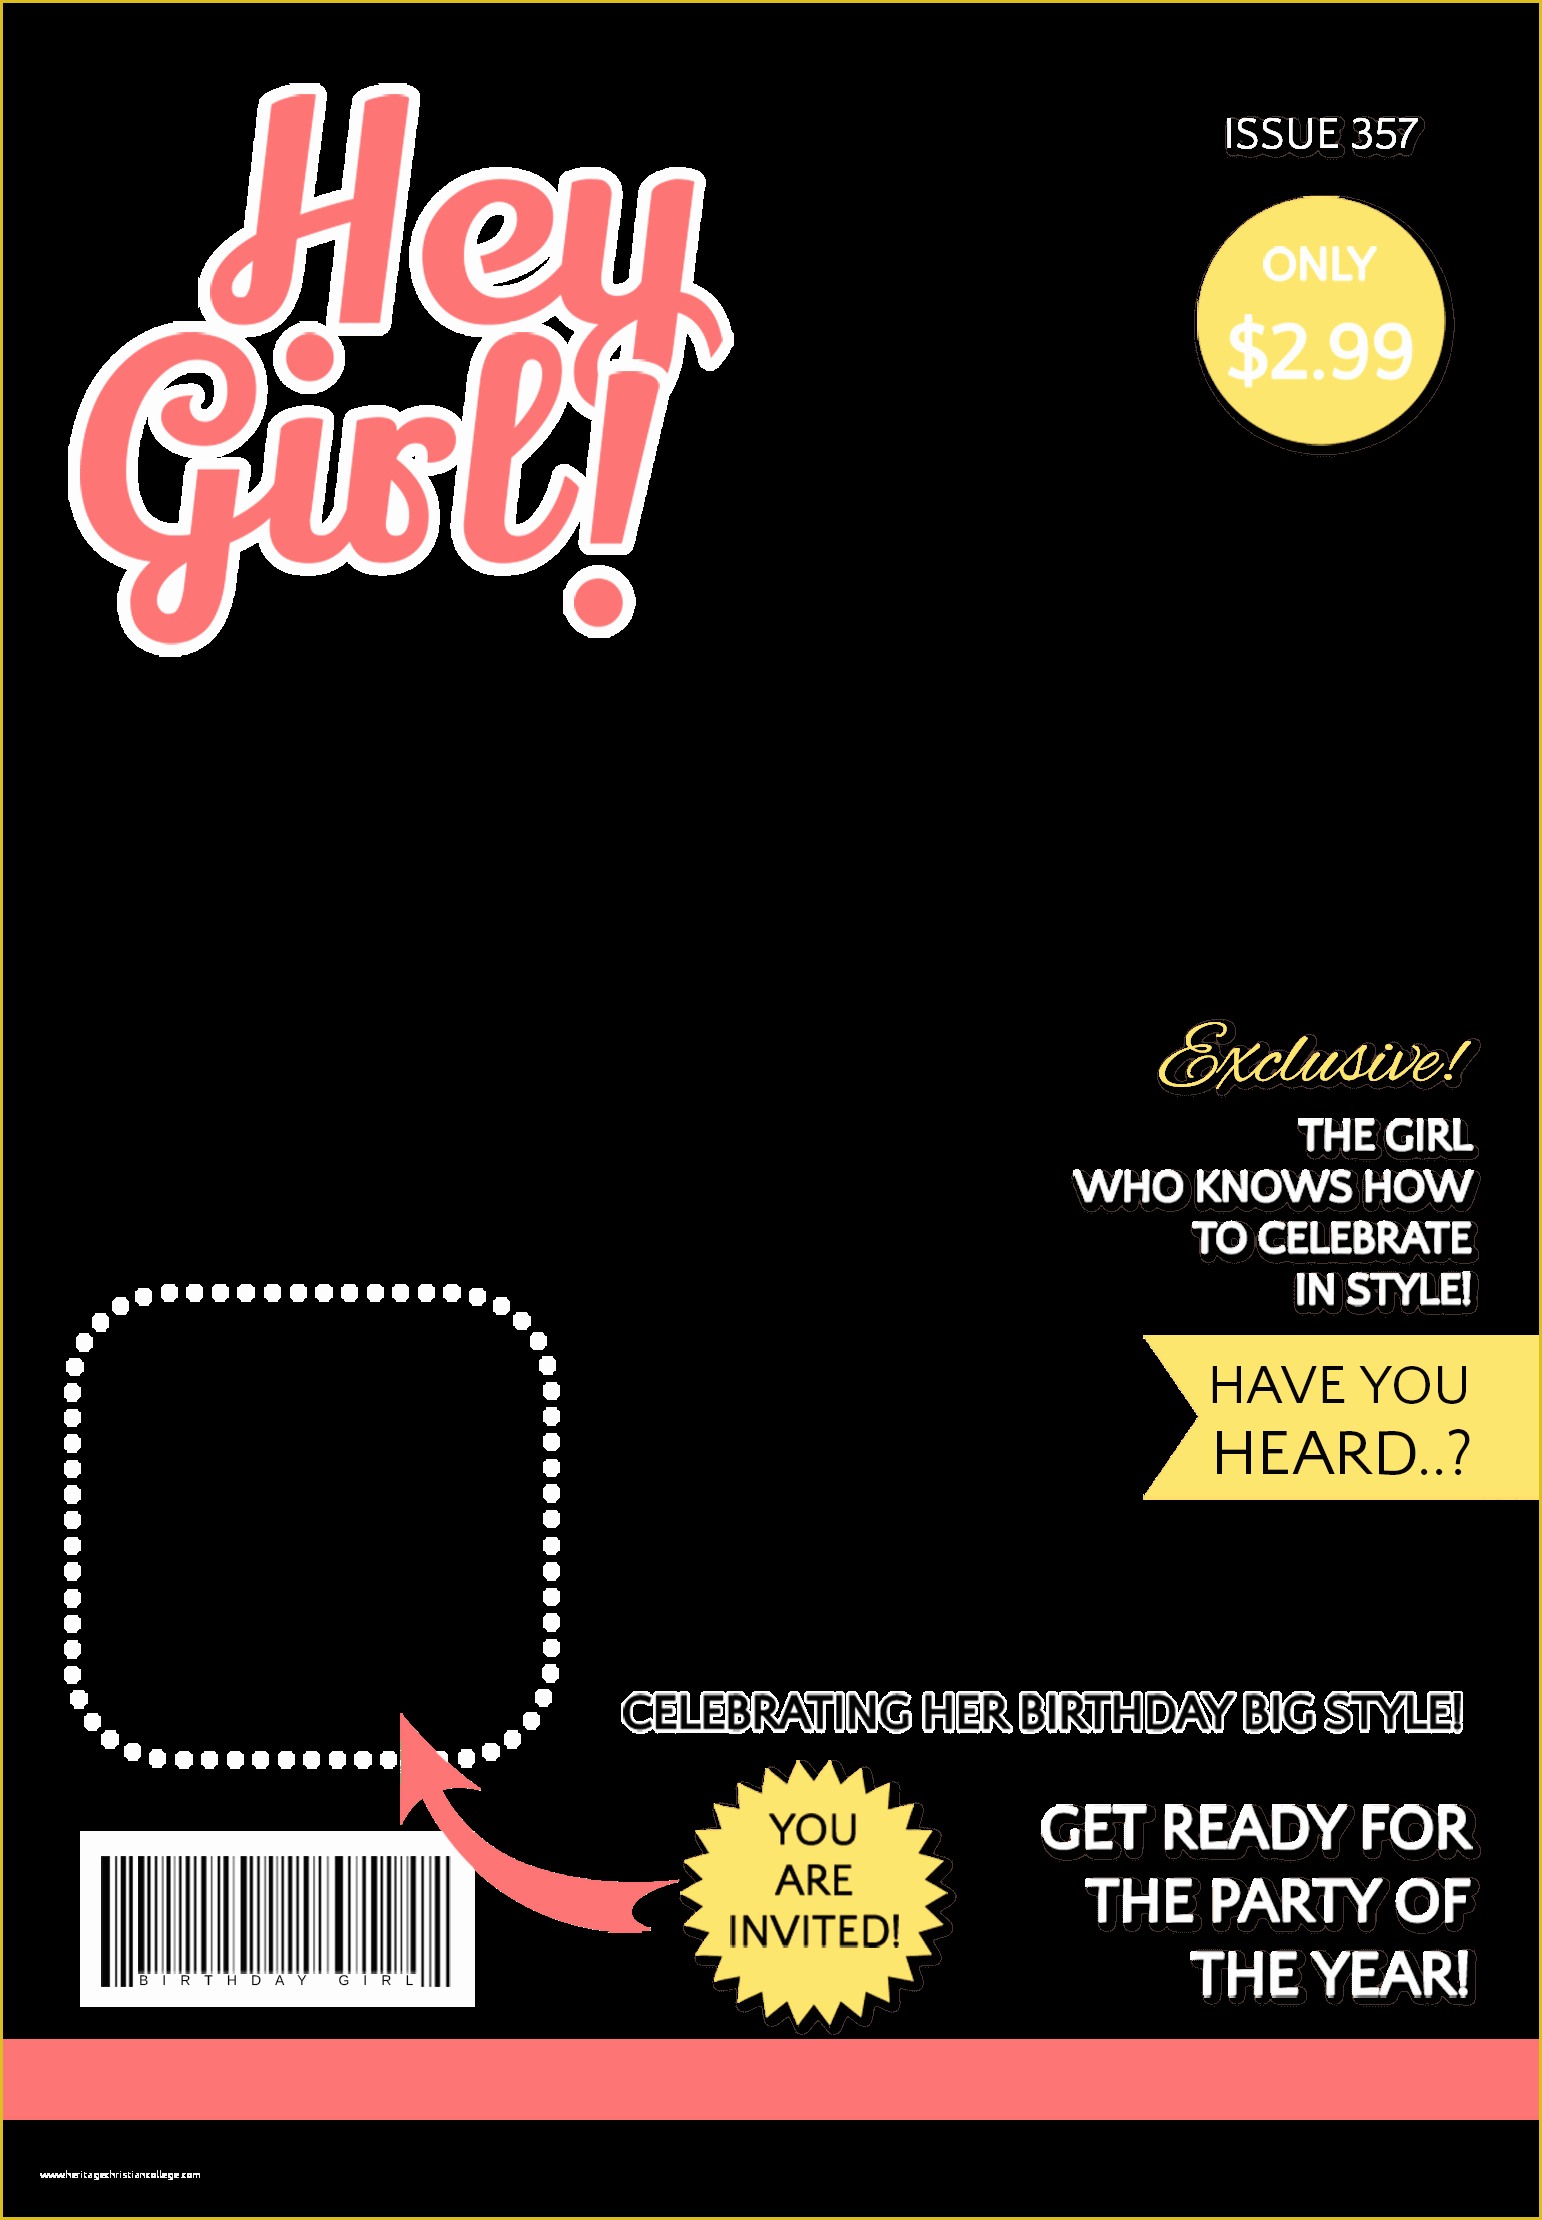 Free Magazine Cover Template Of Hey Girl Magazine Cover Free Printable Birthday